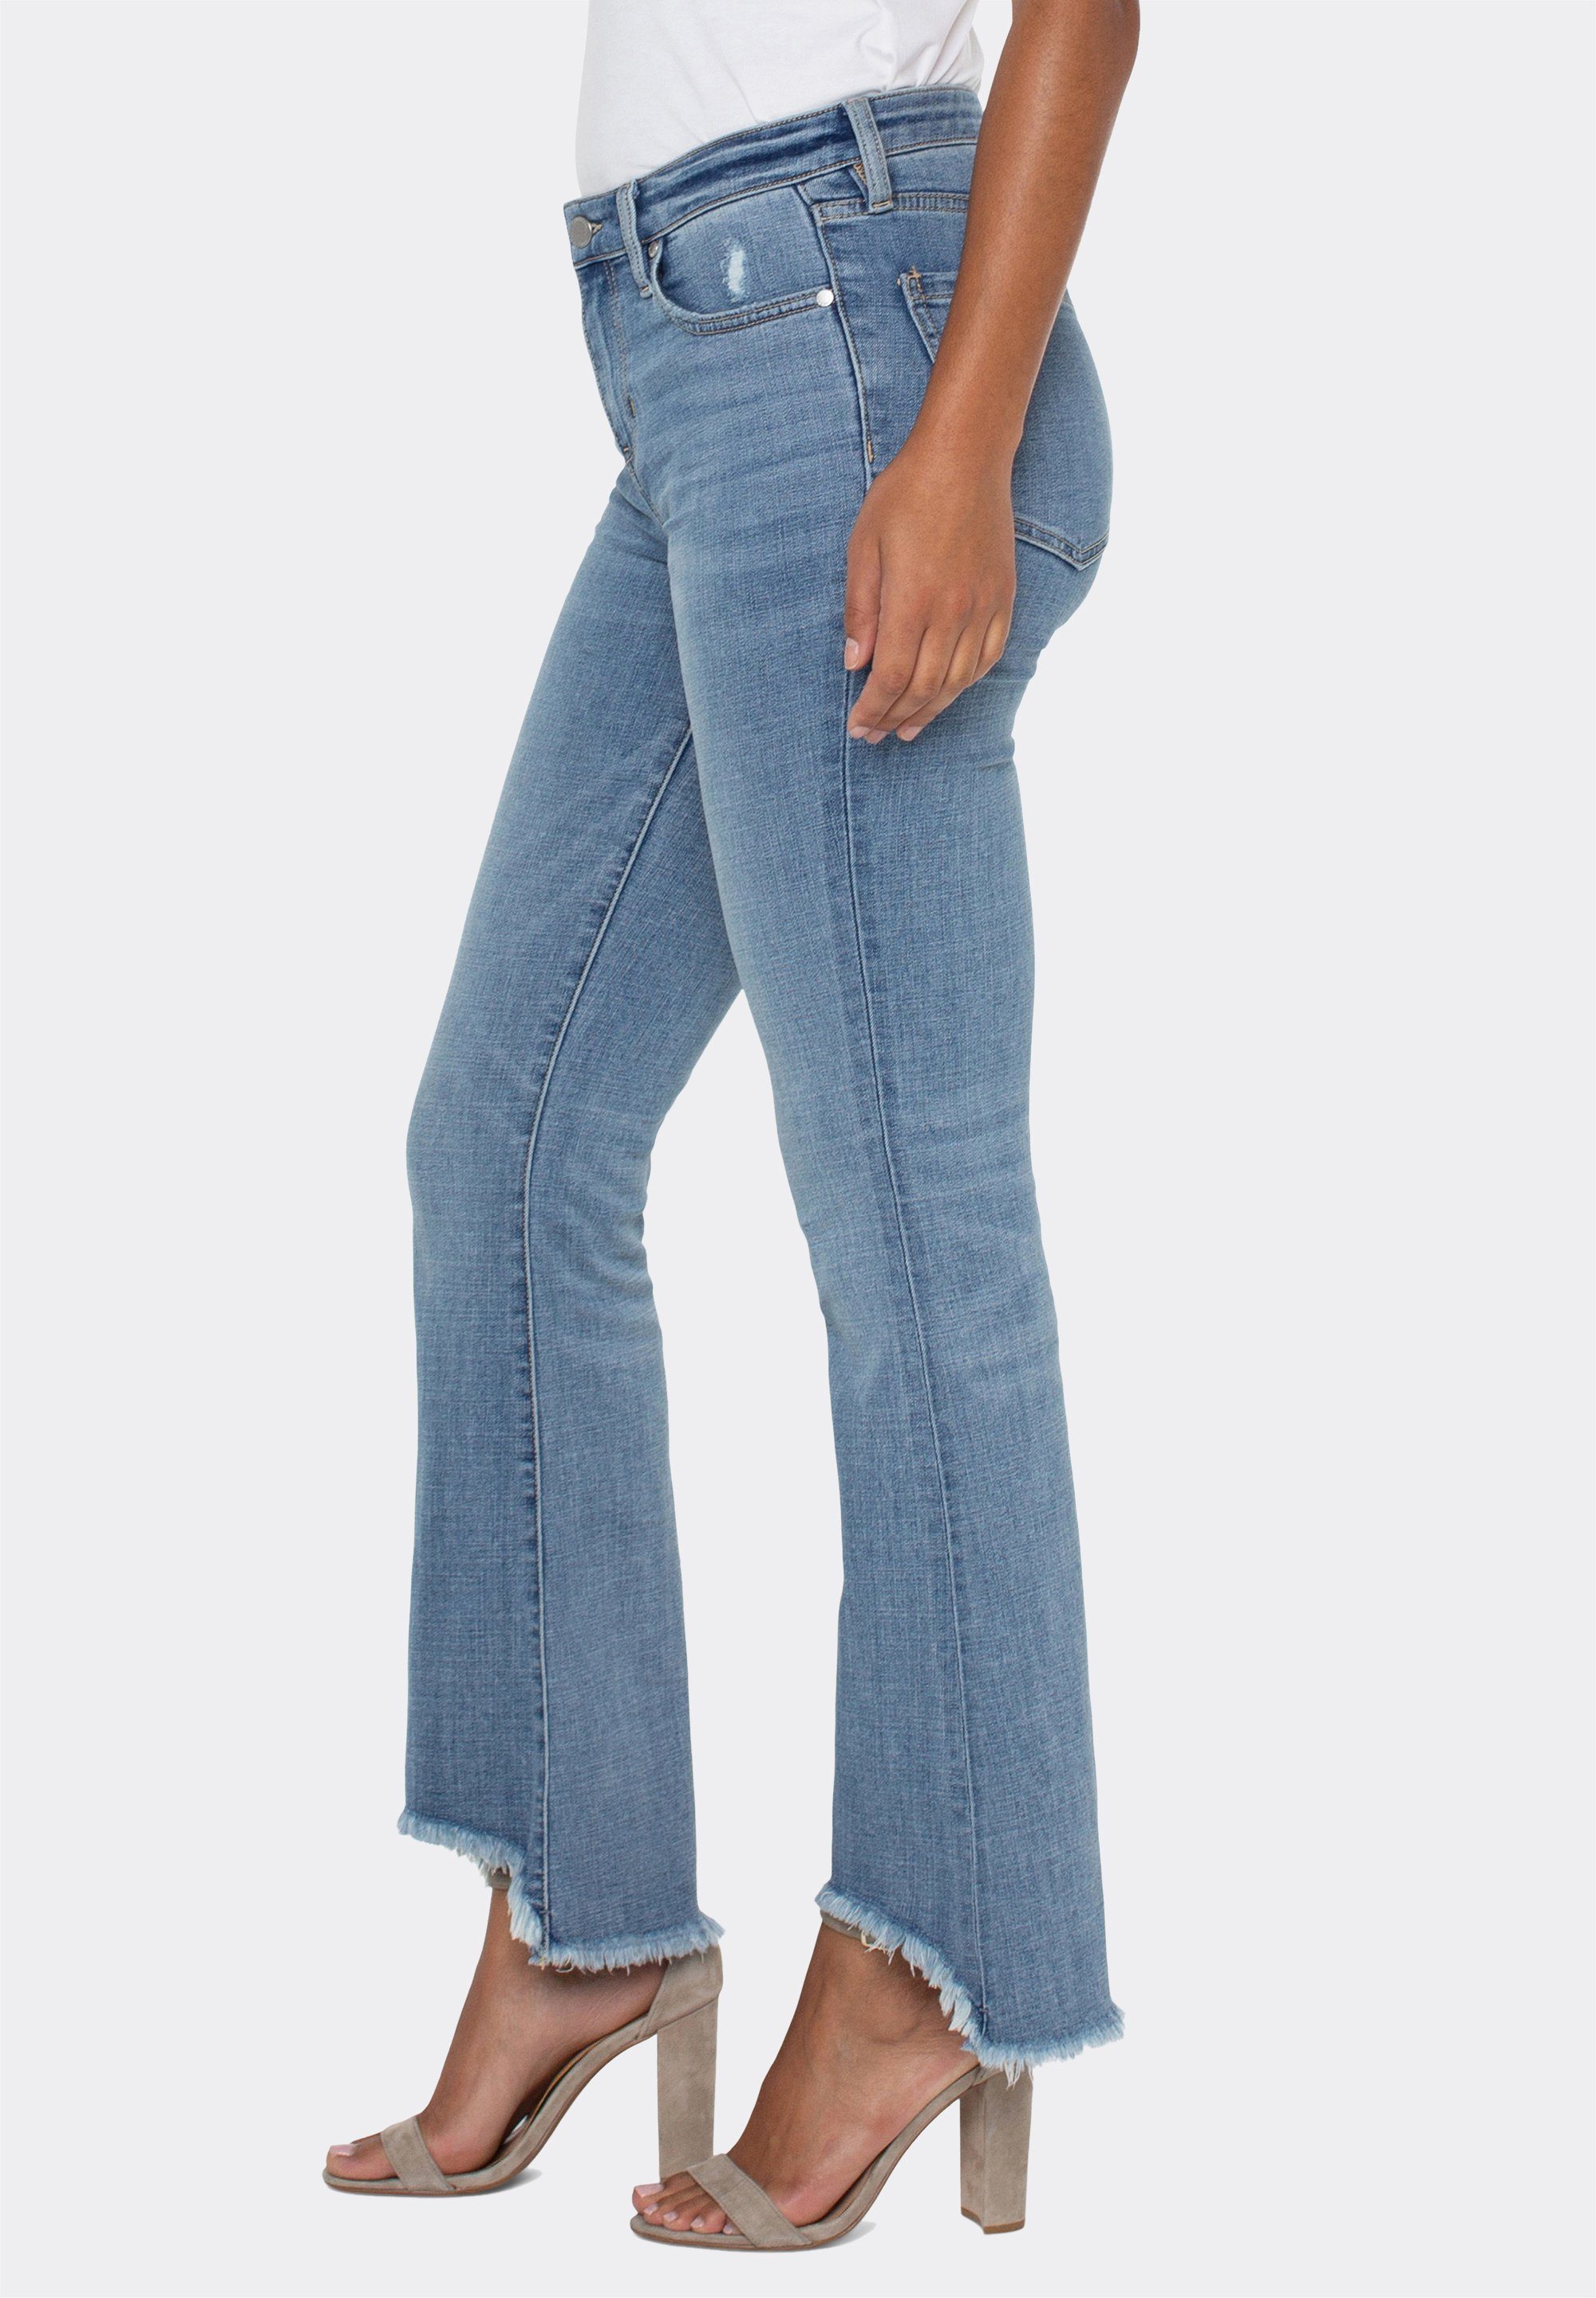 Hannah Stretchy komfortabel Flare Liverpool und Bootcut-Jeans